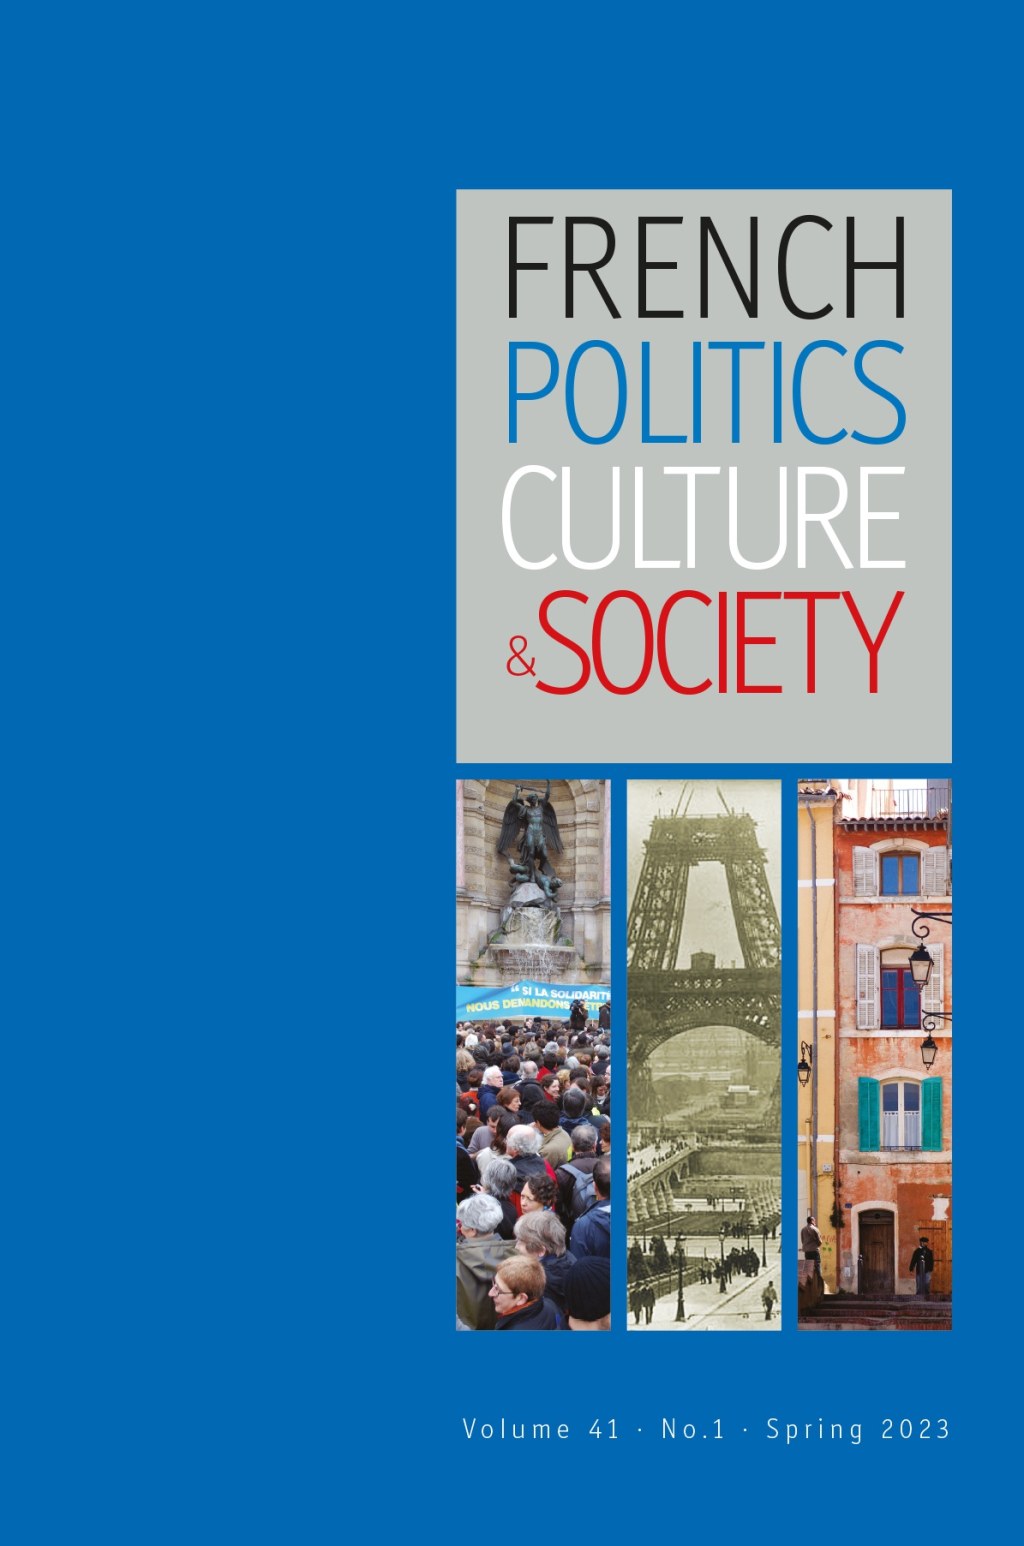 french politics culture & society journal - Journal French Politics, Culture & Society  Cairn International